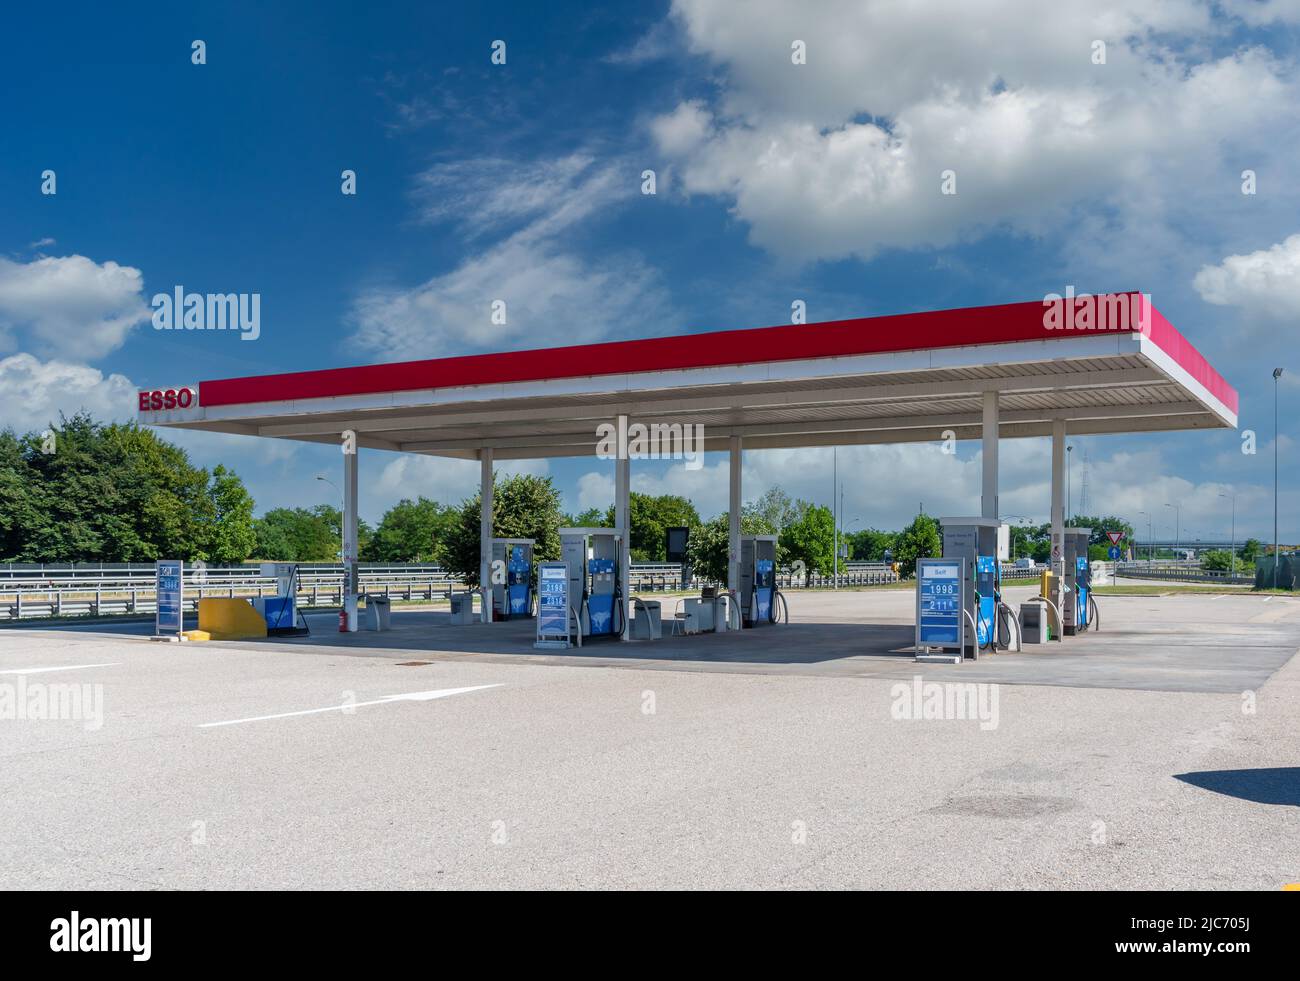 Turin, Italy - June 10, 2022: Esso petrol station on the Turin - Savona motorway with fuel high-priced exhibitors, Esso is a brand of the global oil i Stock Photo